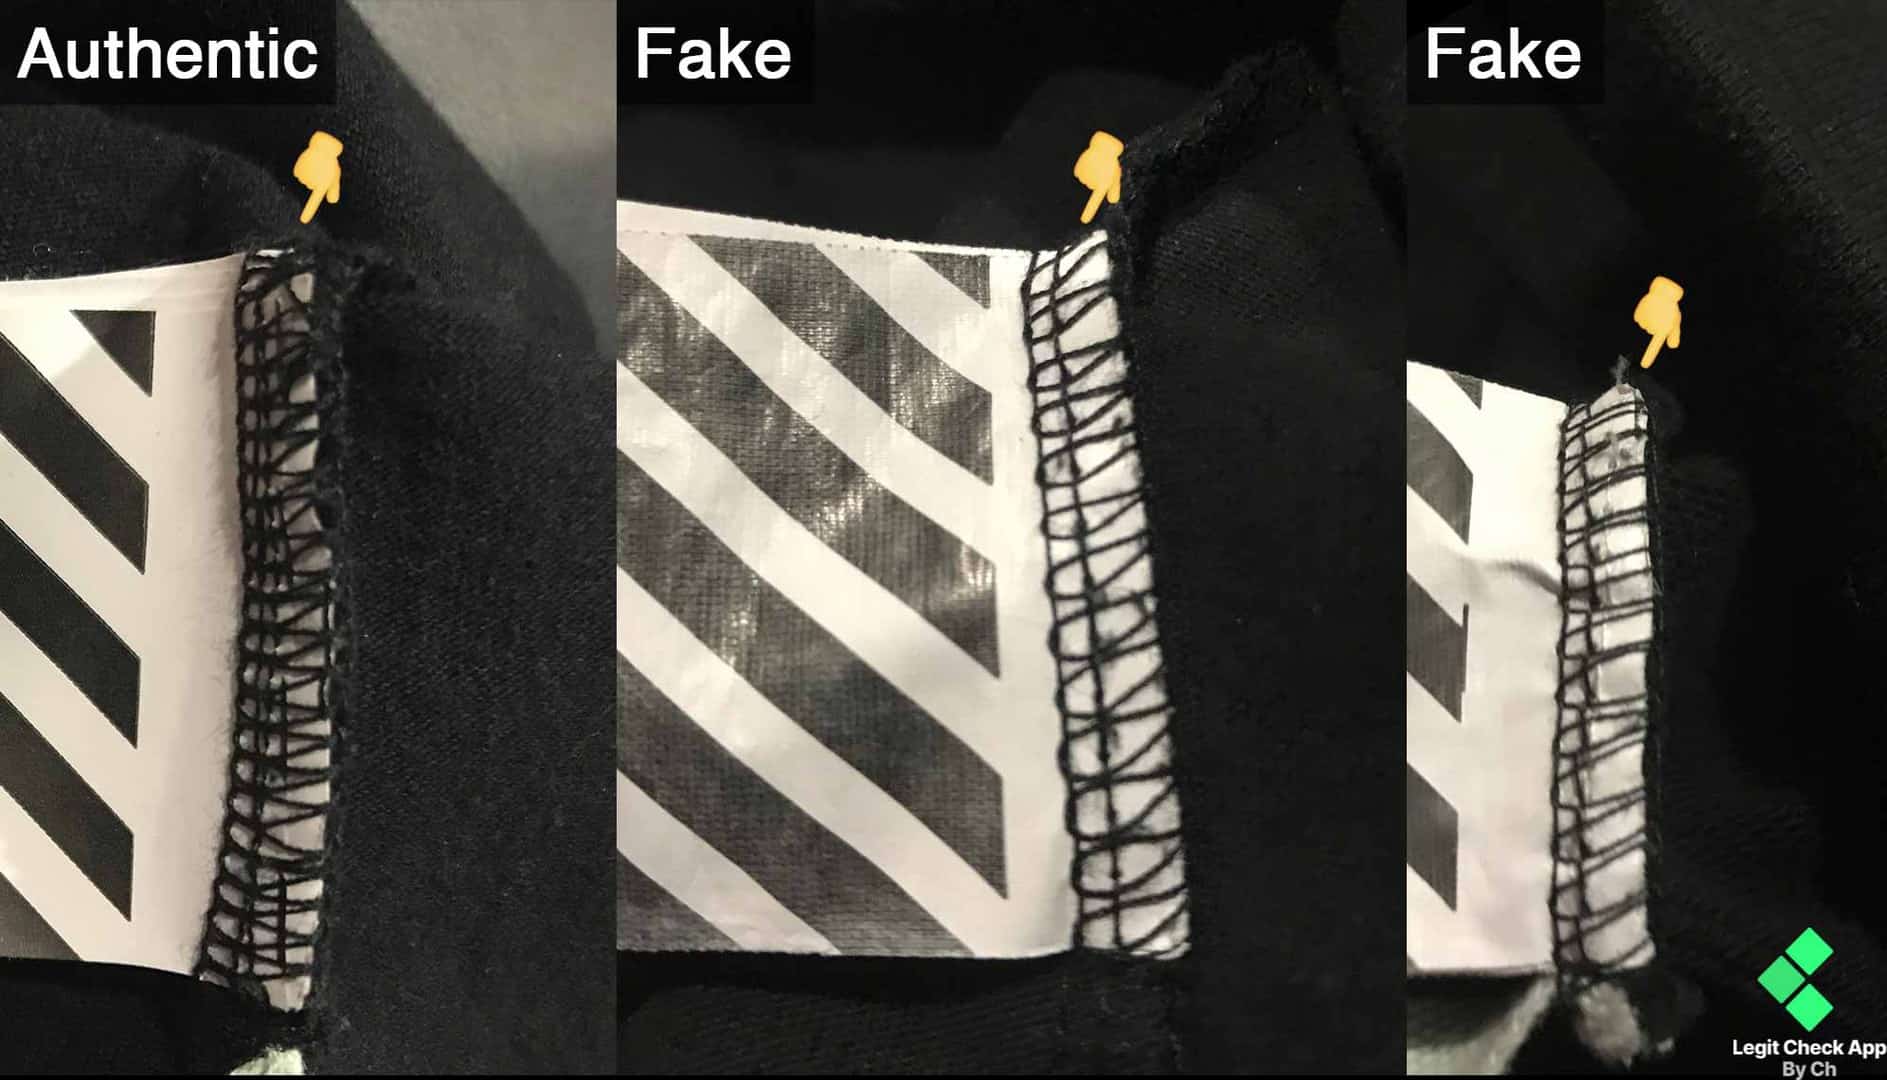 Let at læse Clip sommerfugl Bugt How To Tell If Off-White Is Real Or Fake (2023) - Legit Check